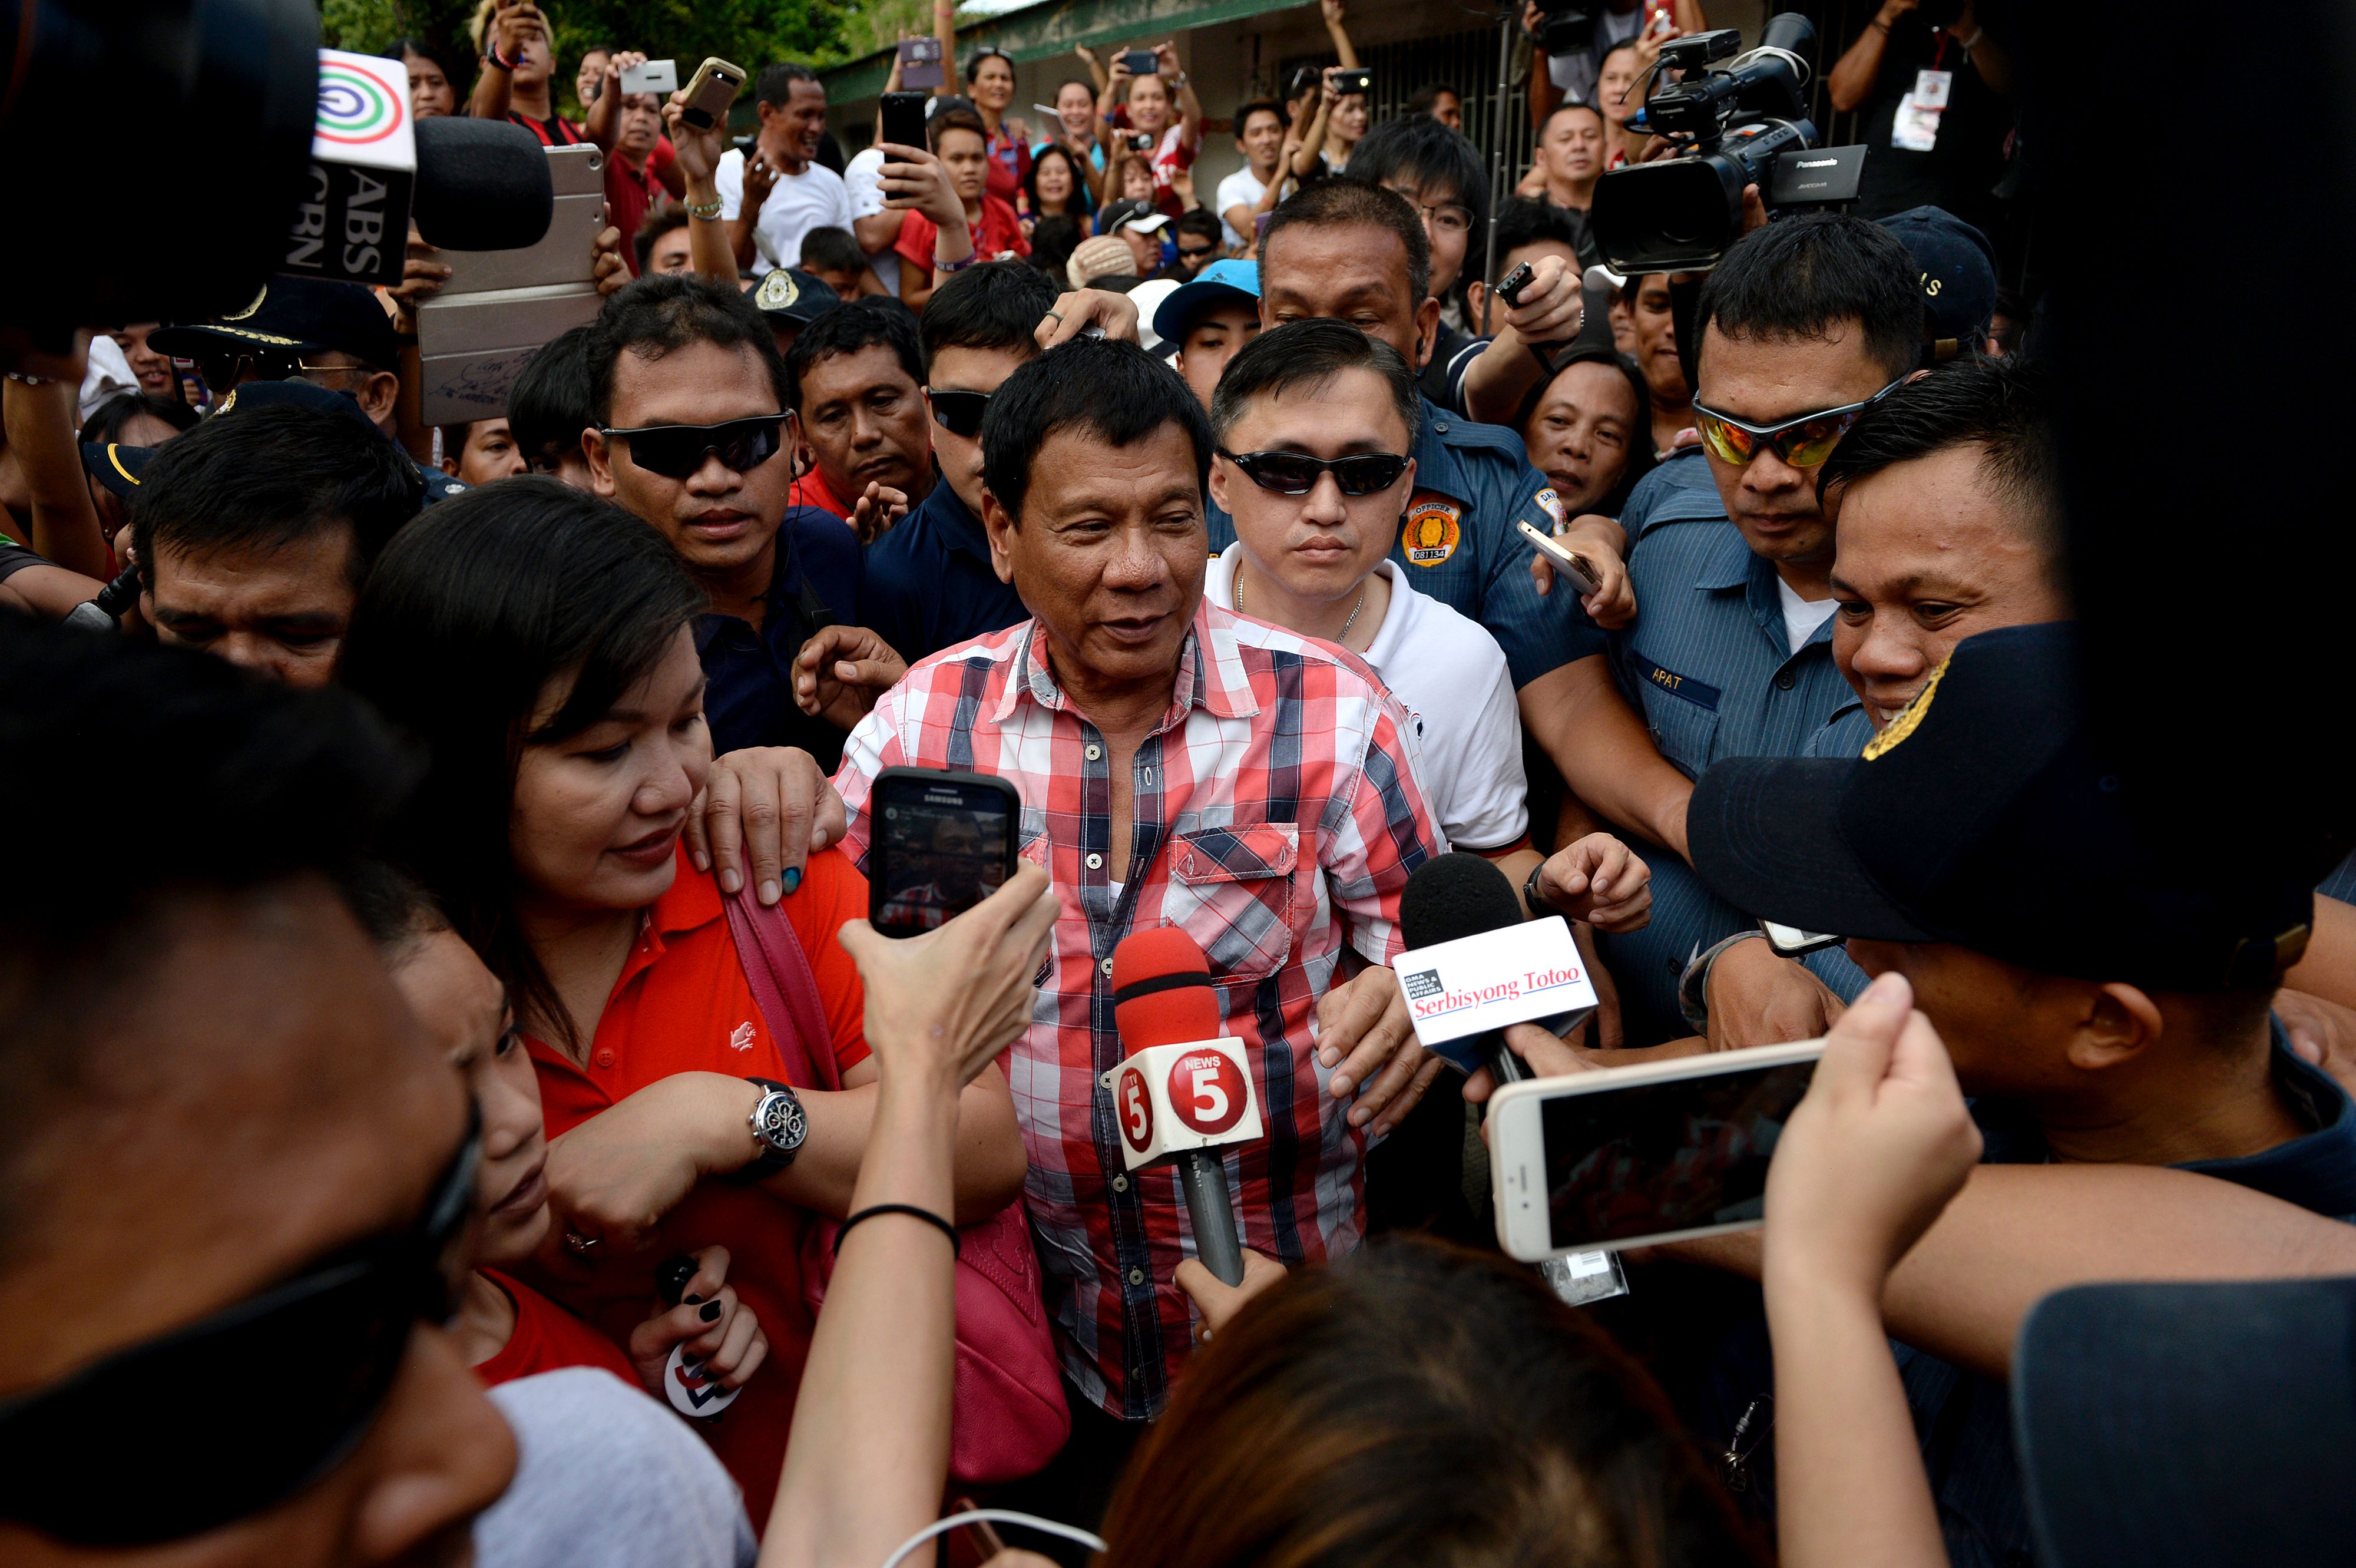 Rodrigo Duterte, who was set to become the next Philippine leader after garnering an insurmountable election lead, leaves after casting his vote at Daniel Aguinaldo National High School in the southern city of Davao on Monday. | AFP-JIJI